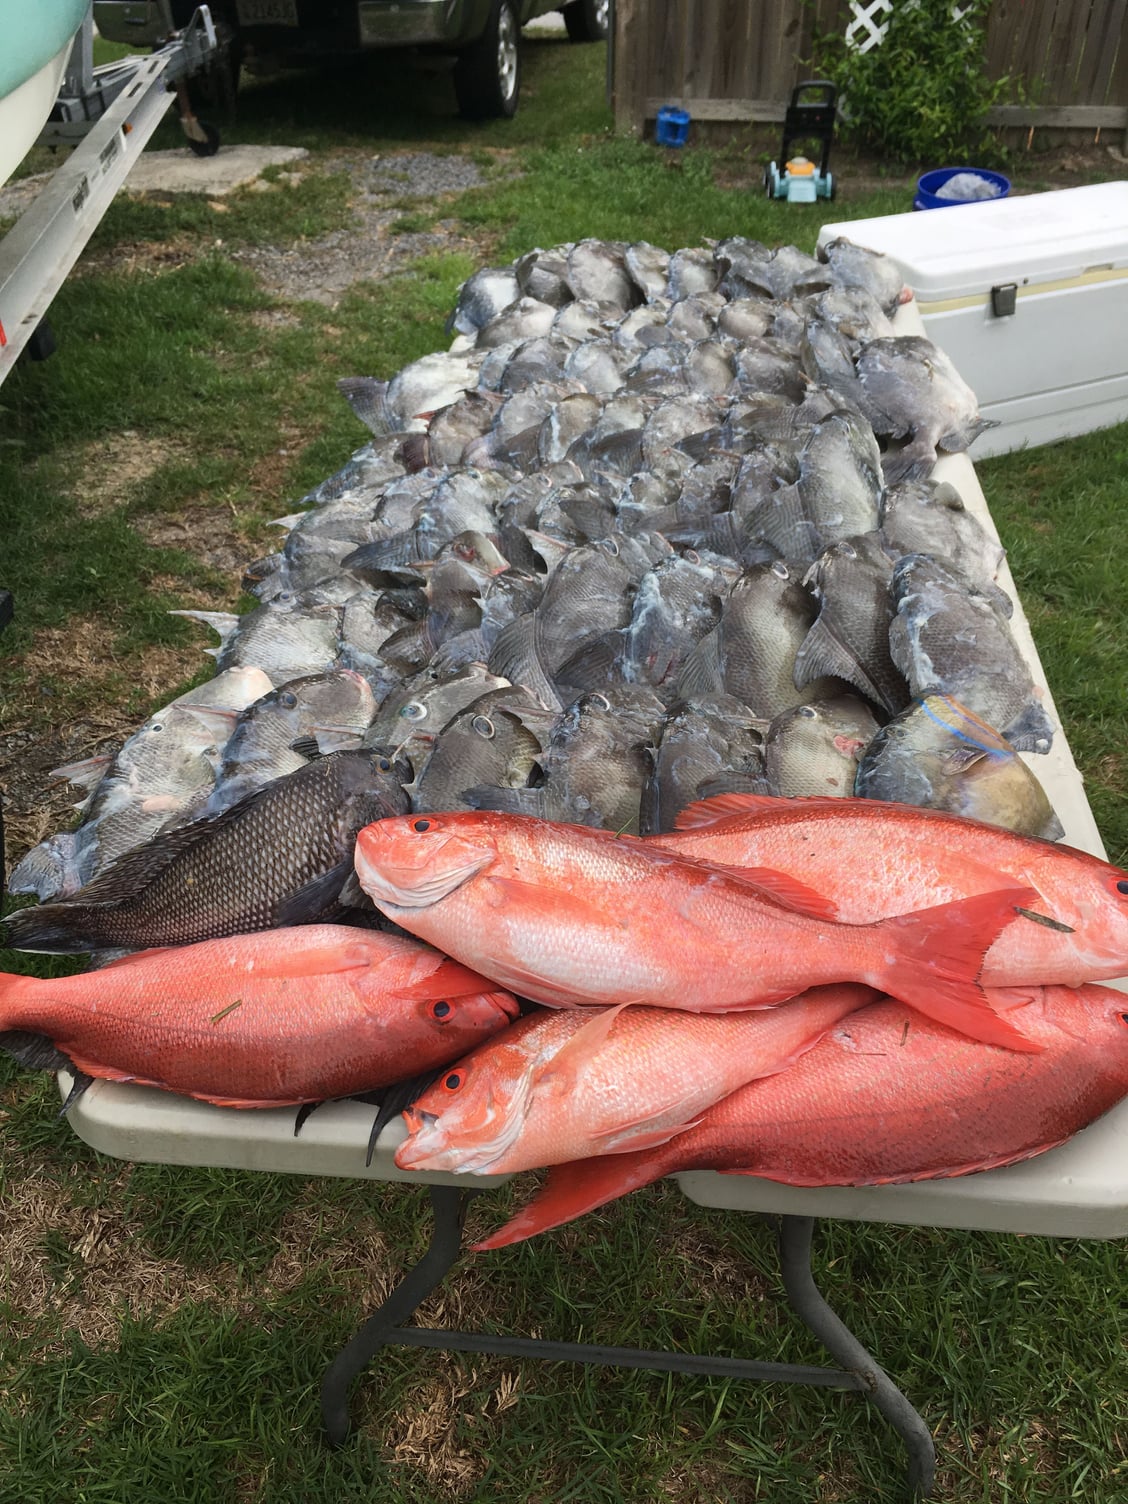 Charleston Offshore Fishing Reports/Discussion Thread